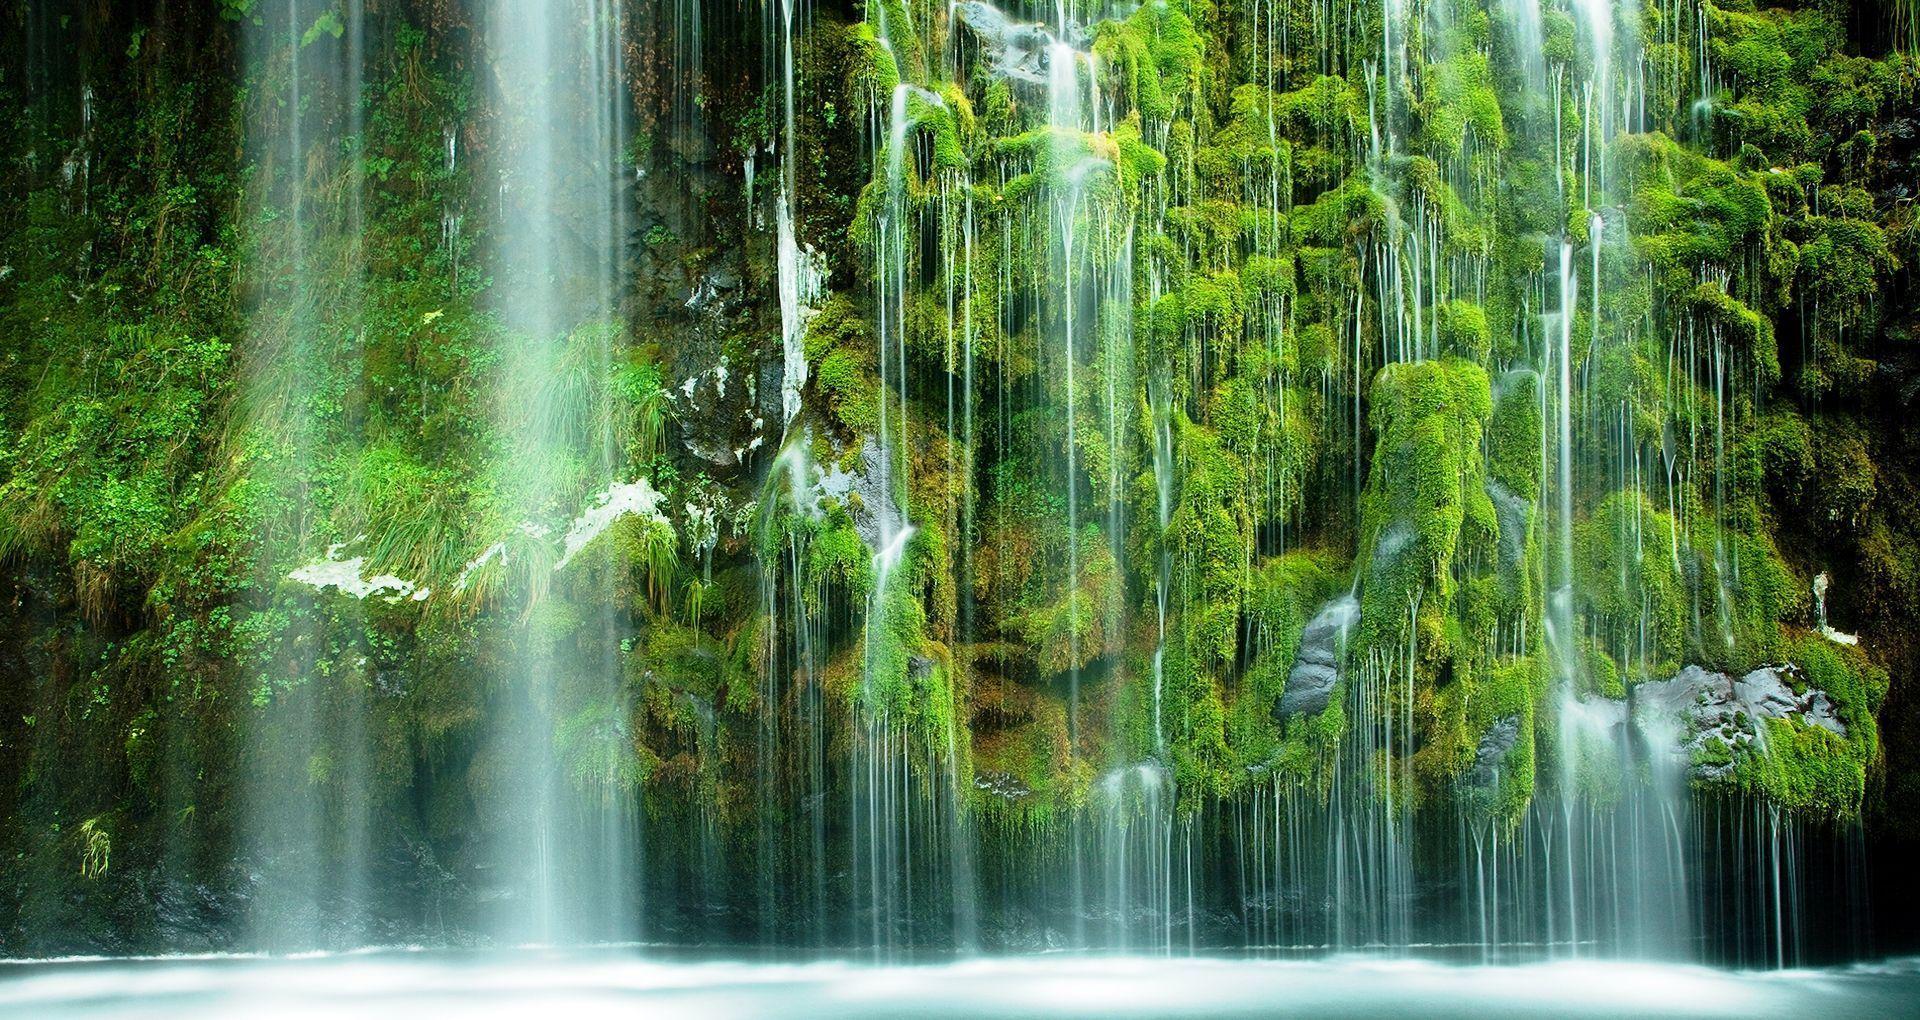 Animated Waterfall Wallpapers - Top Free Animated Waterfall Backgrounds